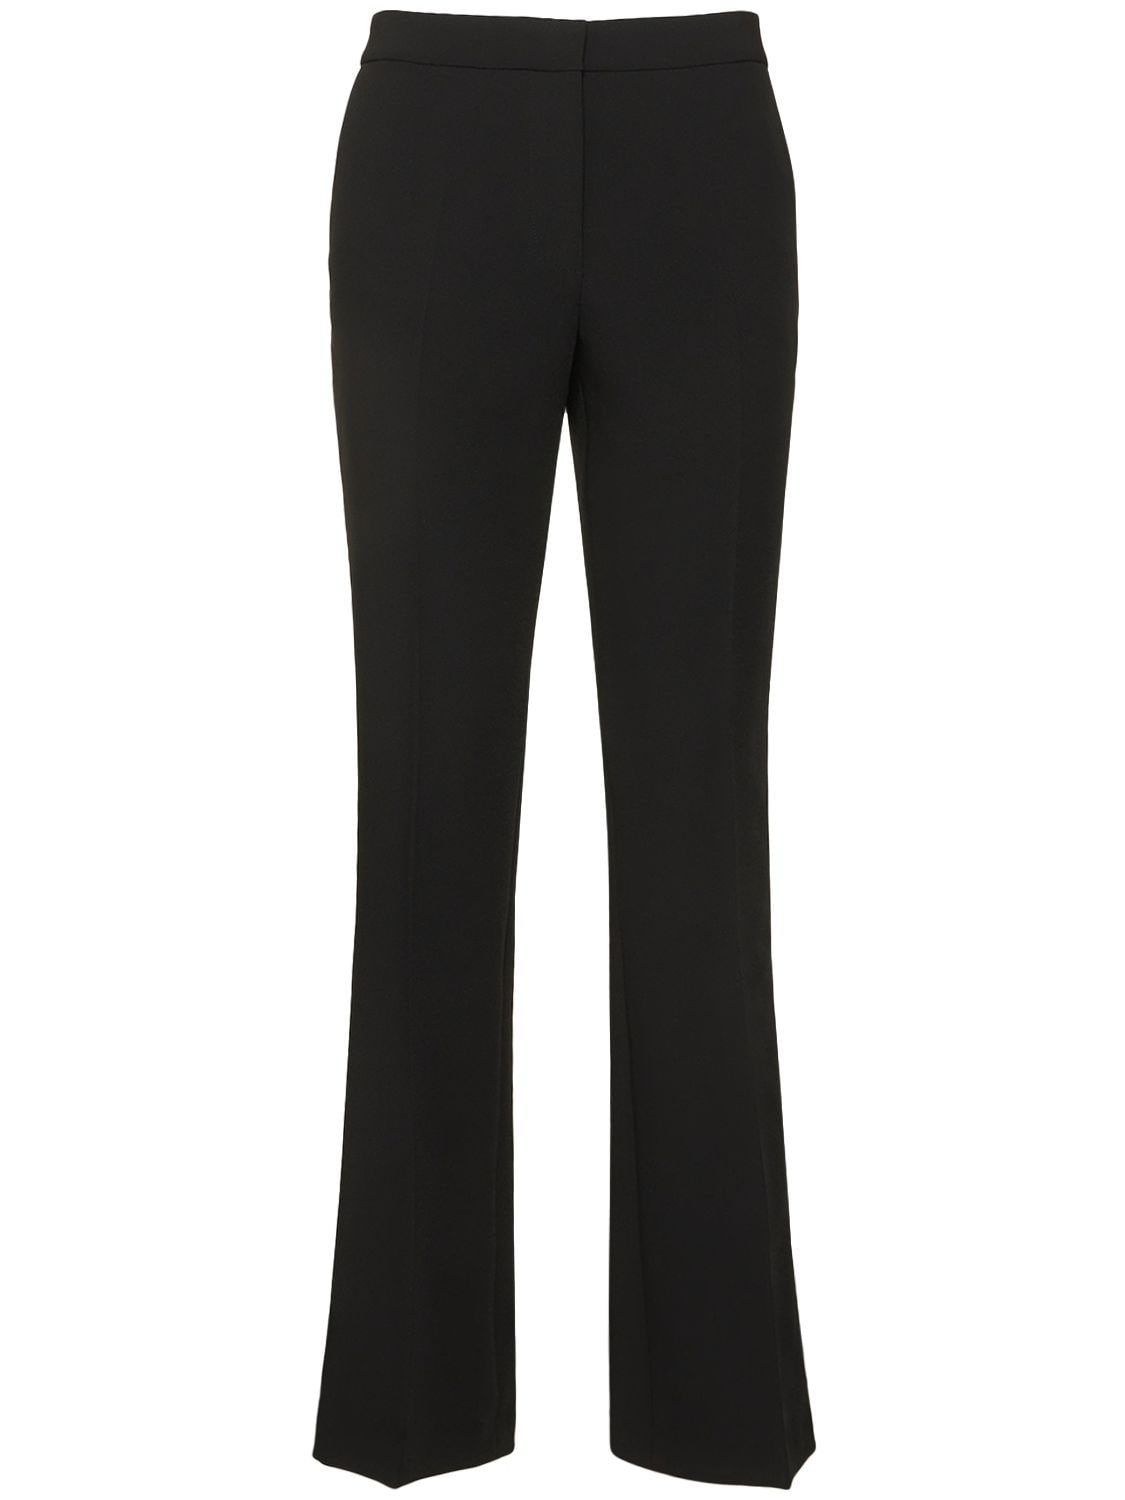 MUSIER PARIS Melina Stretch Crepe Flared Trousers